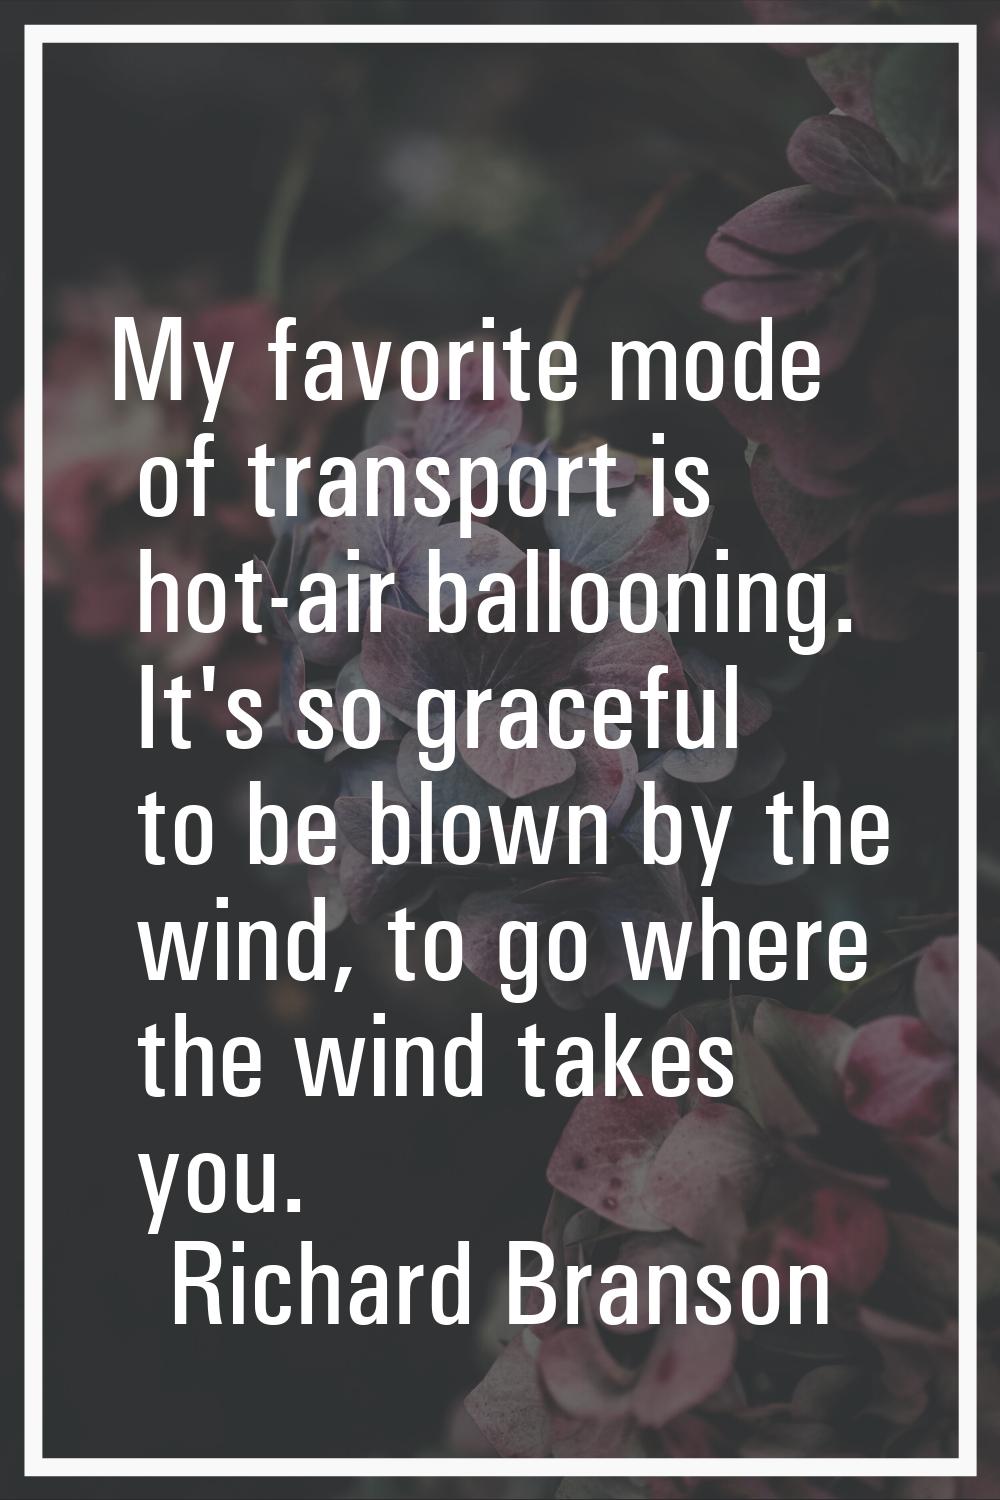 My favorite mode of transport is hot-air ballooning. It's so graceful to be blown by the wind, to g